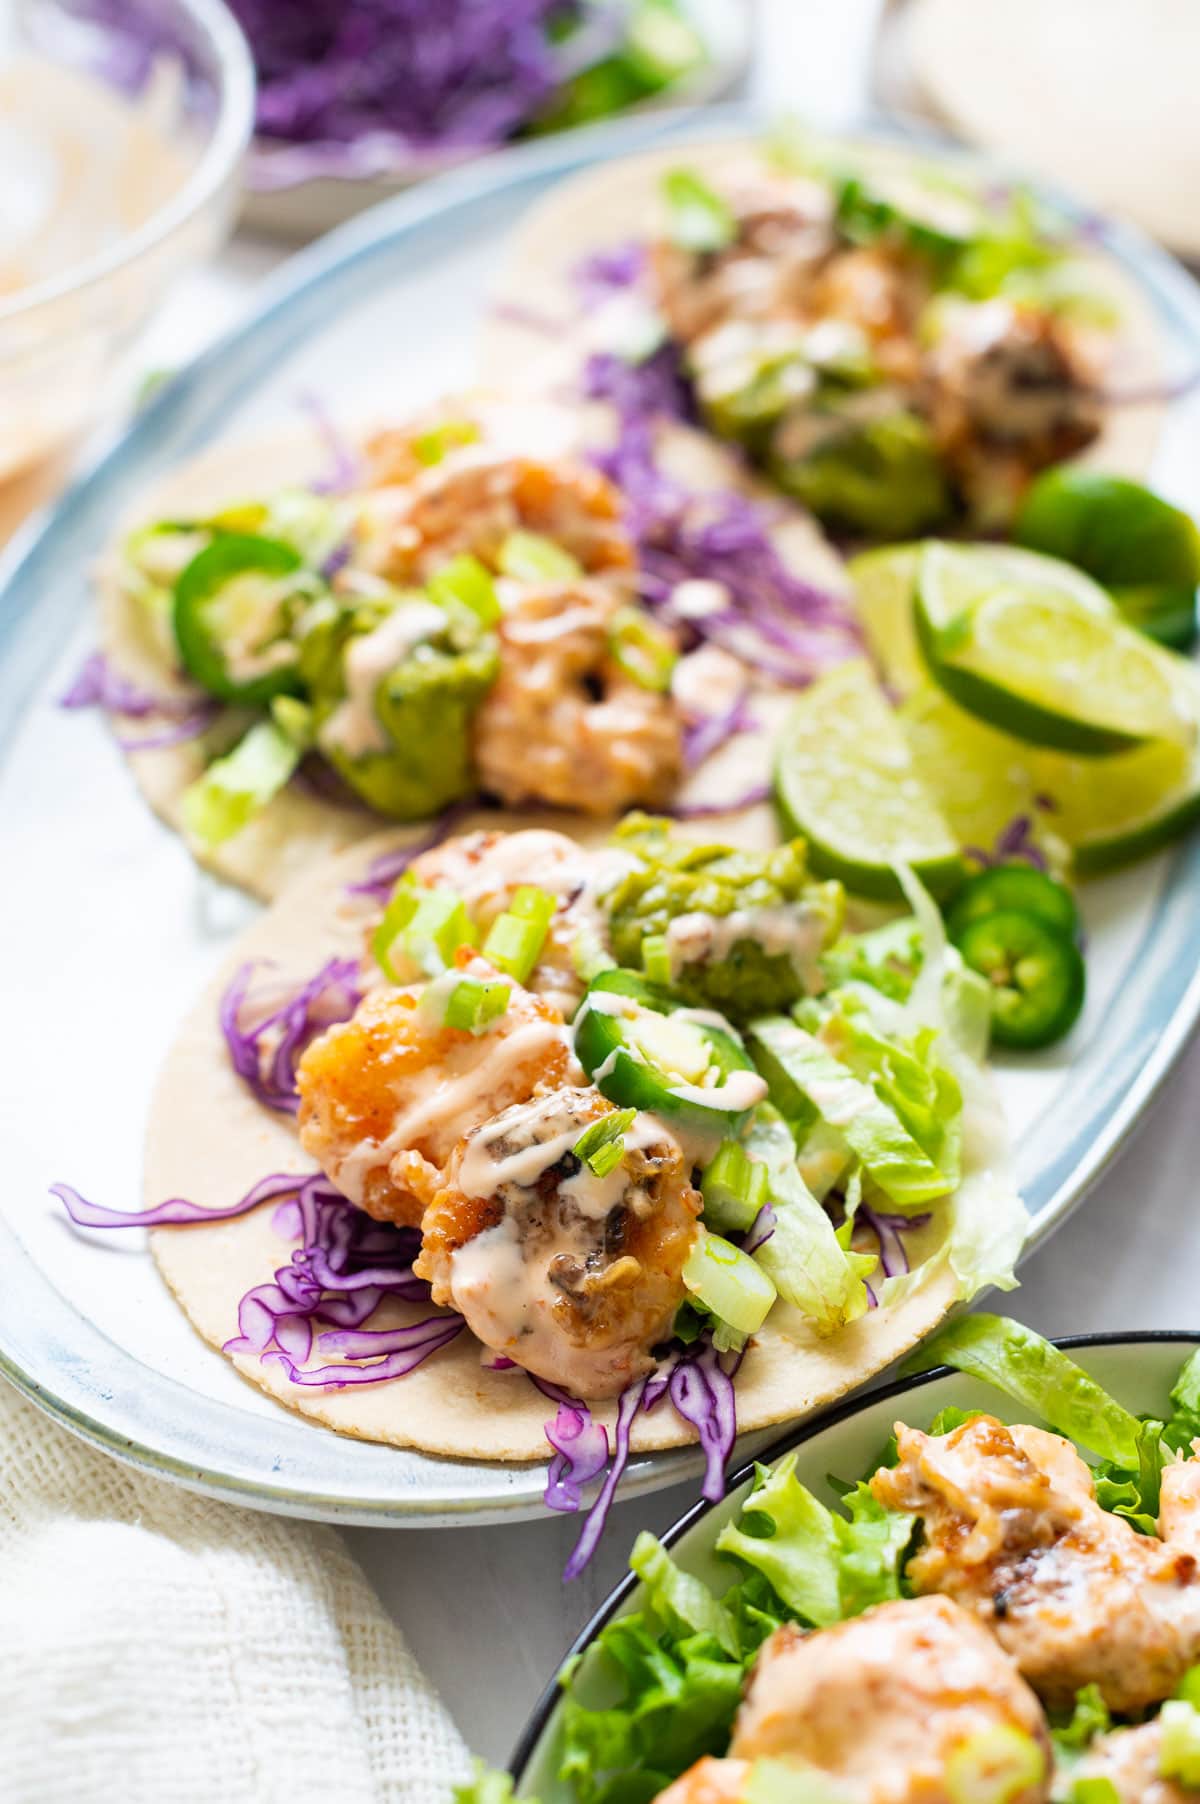 Bang bang shrimp tacos with lettuce, red cabbage, jalapeno and sauce served on a plate.